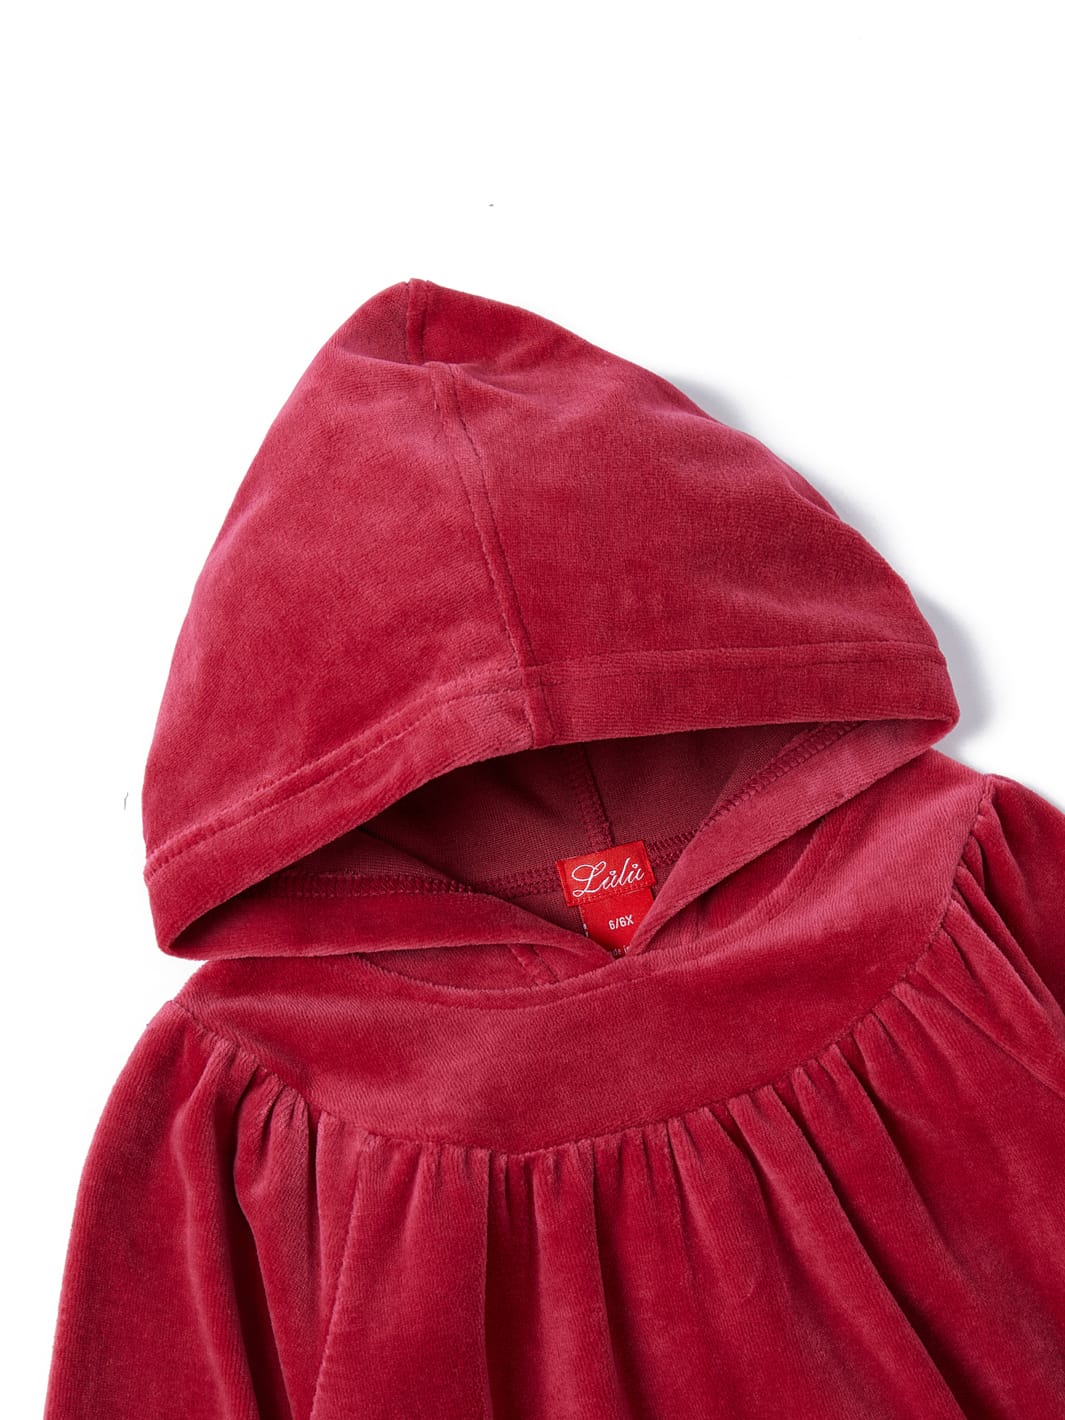 Velour Hooded Gathers Top